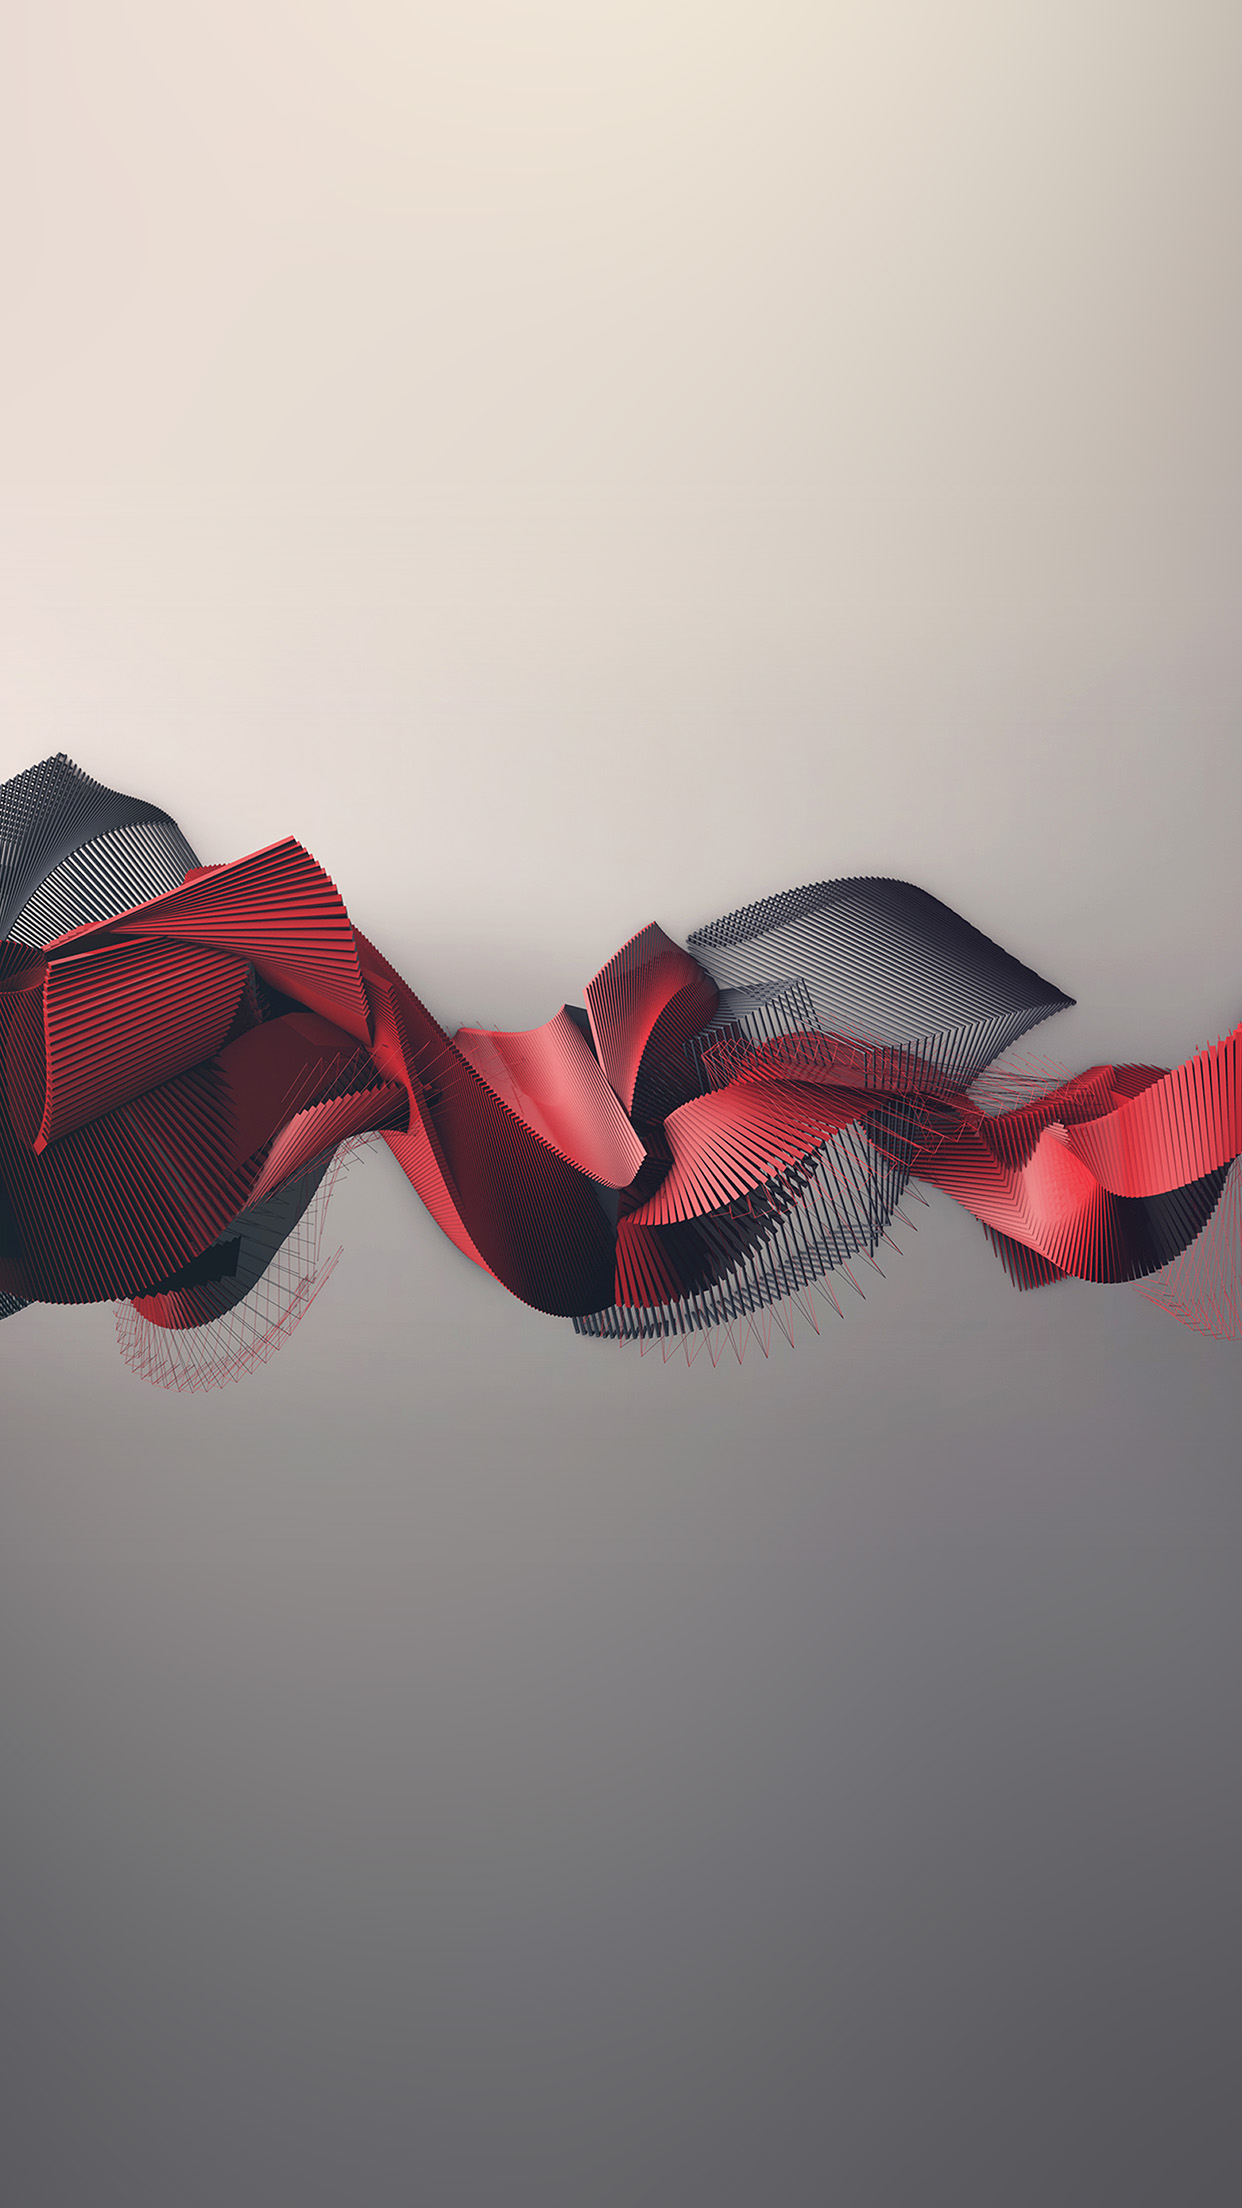 Art Pattern Abstract Art Red Illust Android wallpaper